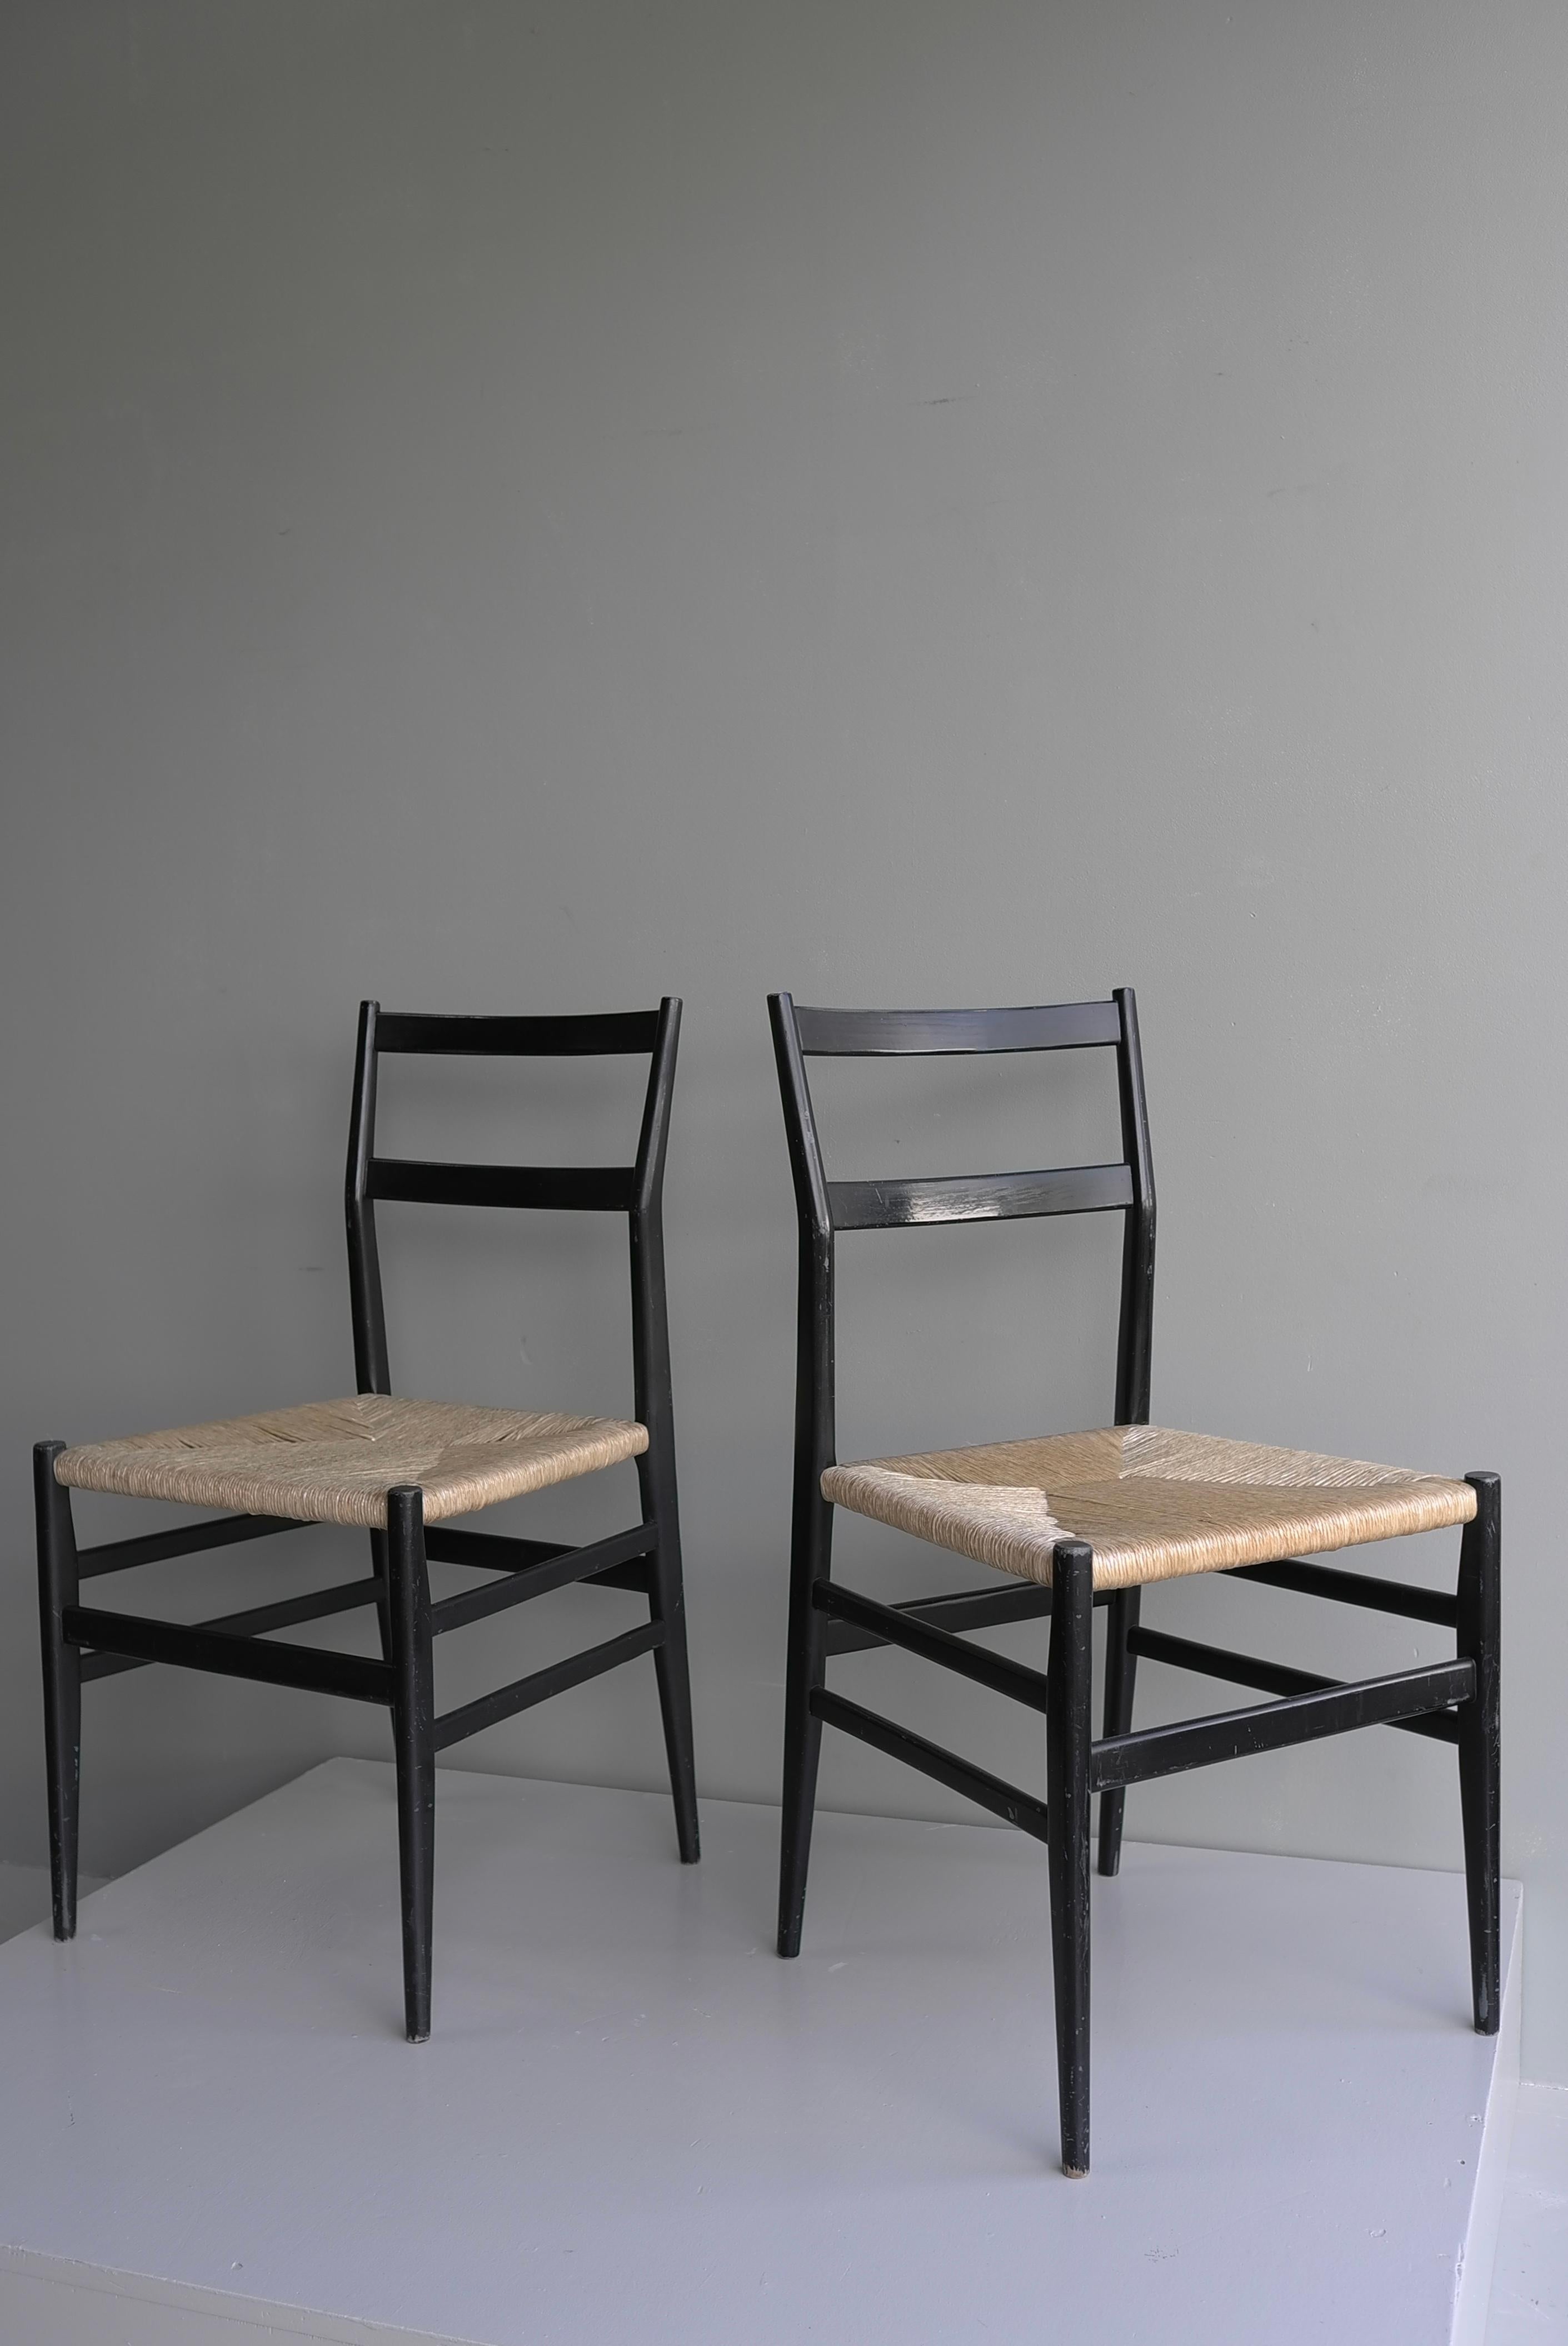 Pair of Black Gio Ponti Leggera Chairs with Cord Seat, Italy, 1951 For Sale 3